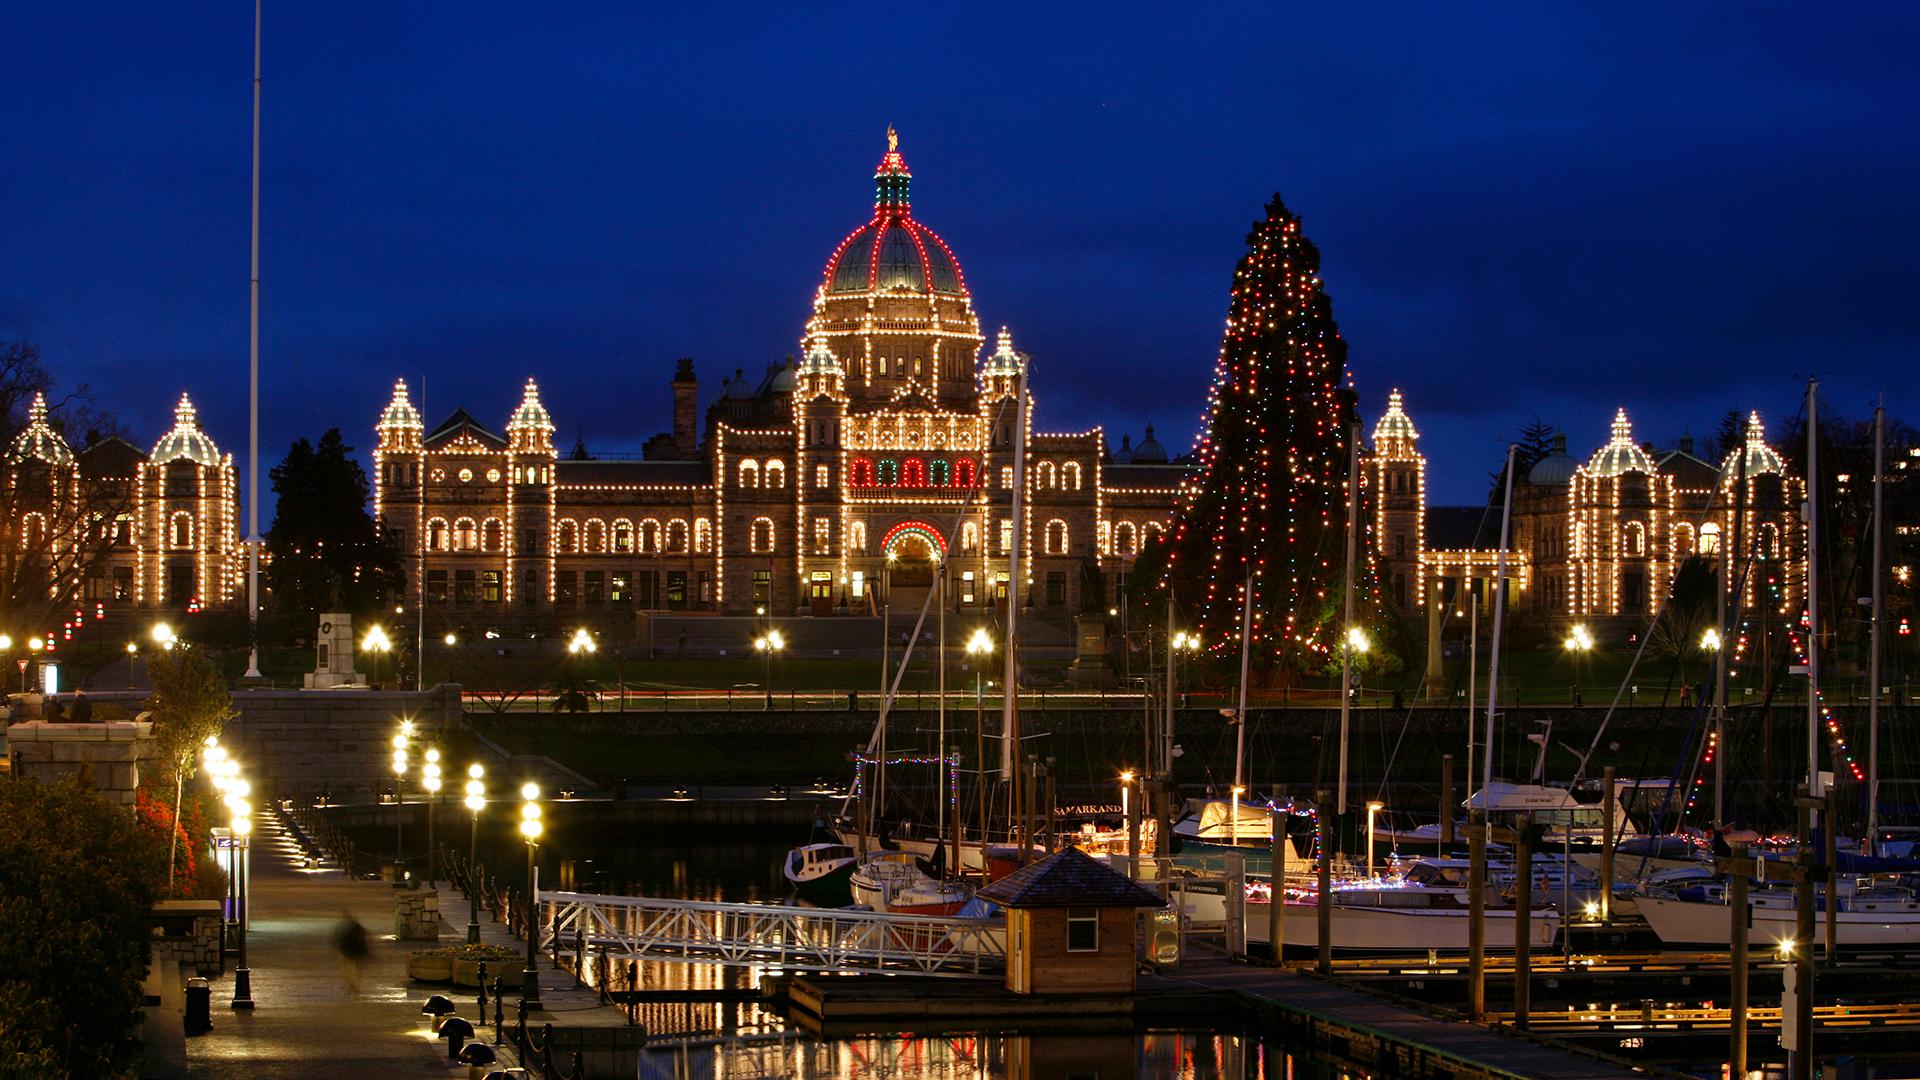 Parliament building in Victoria lit up for Christmas